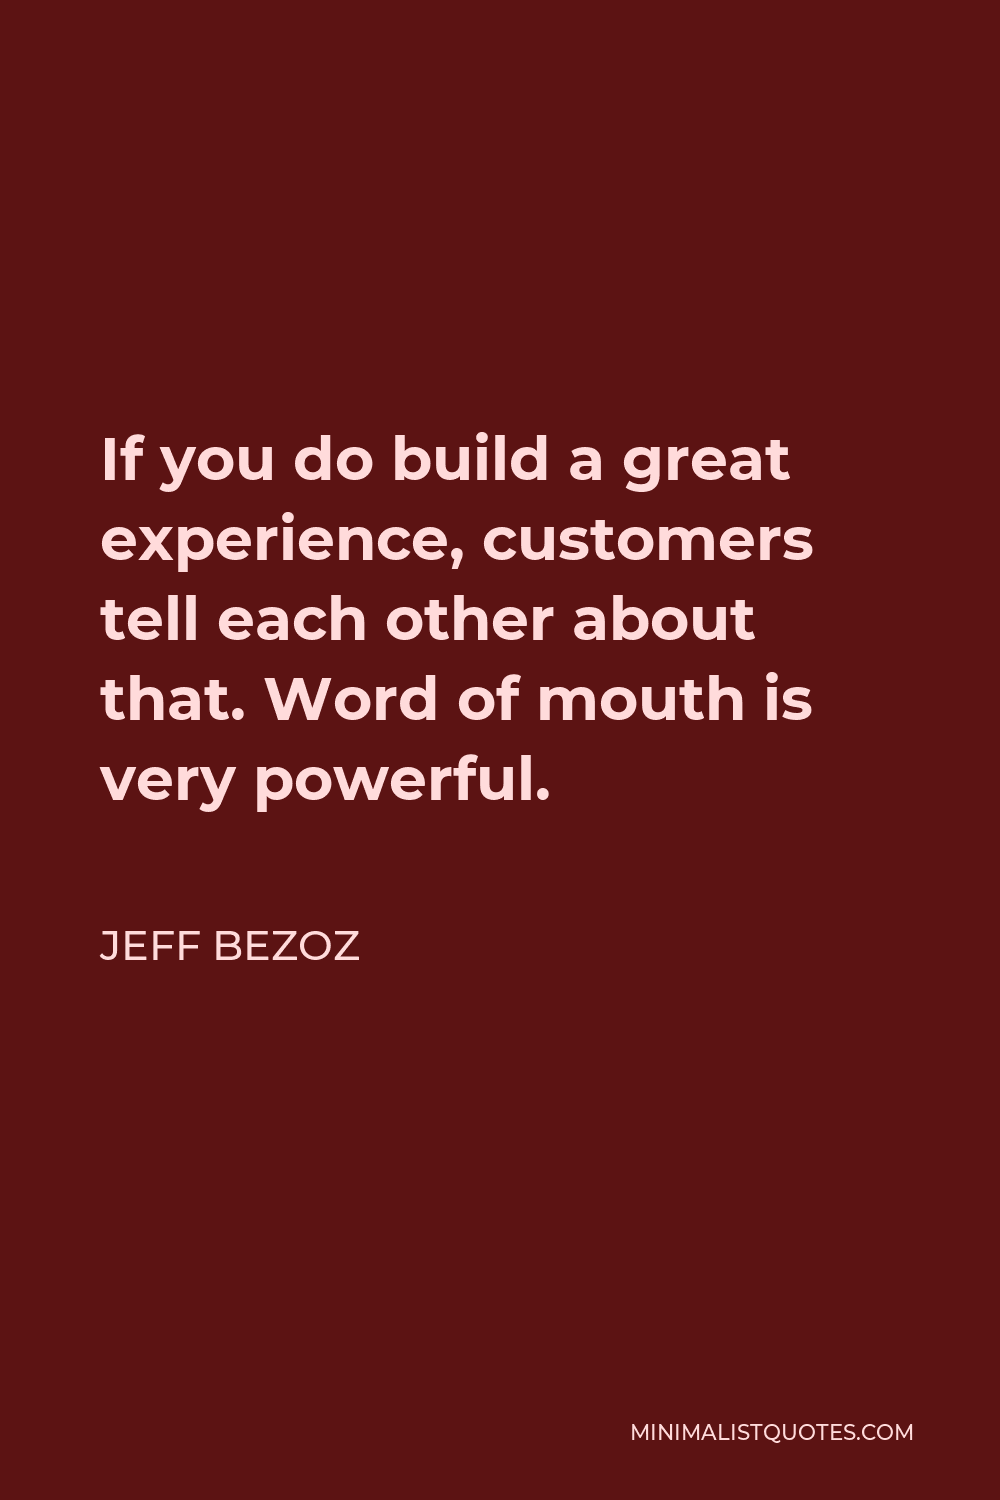 Jeff Bezoz Quote - If you do build a great experience, customers tell each other about that. Word of mouth is very powerful.